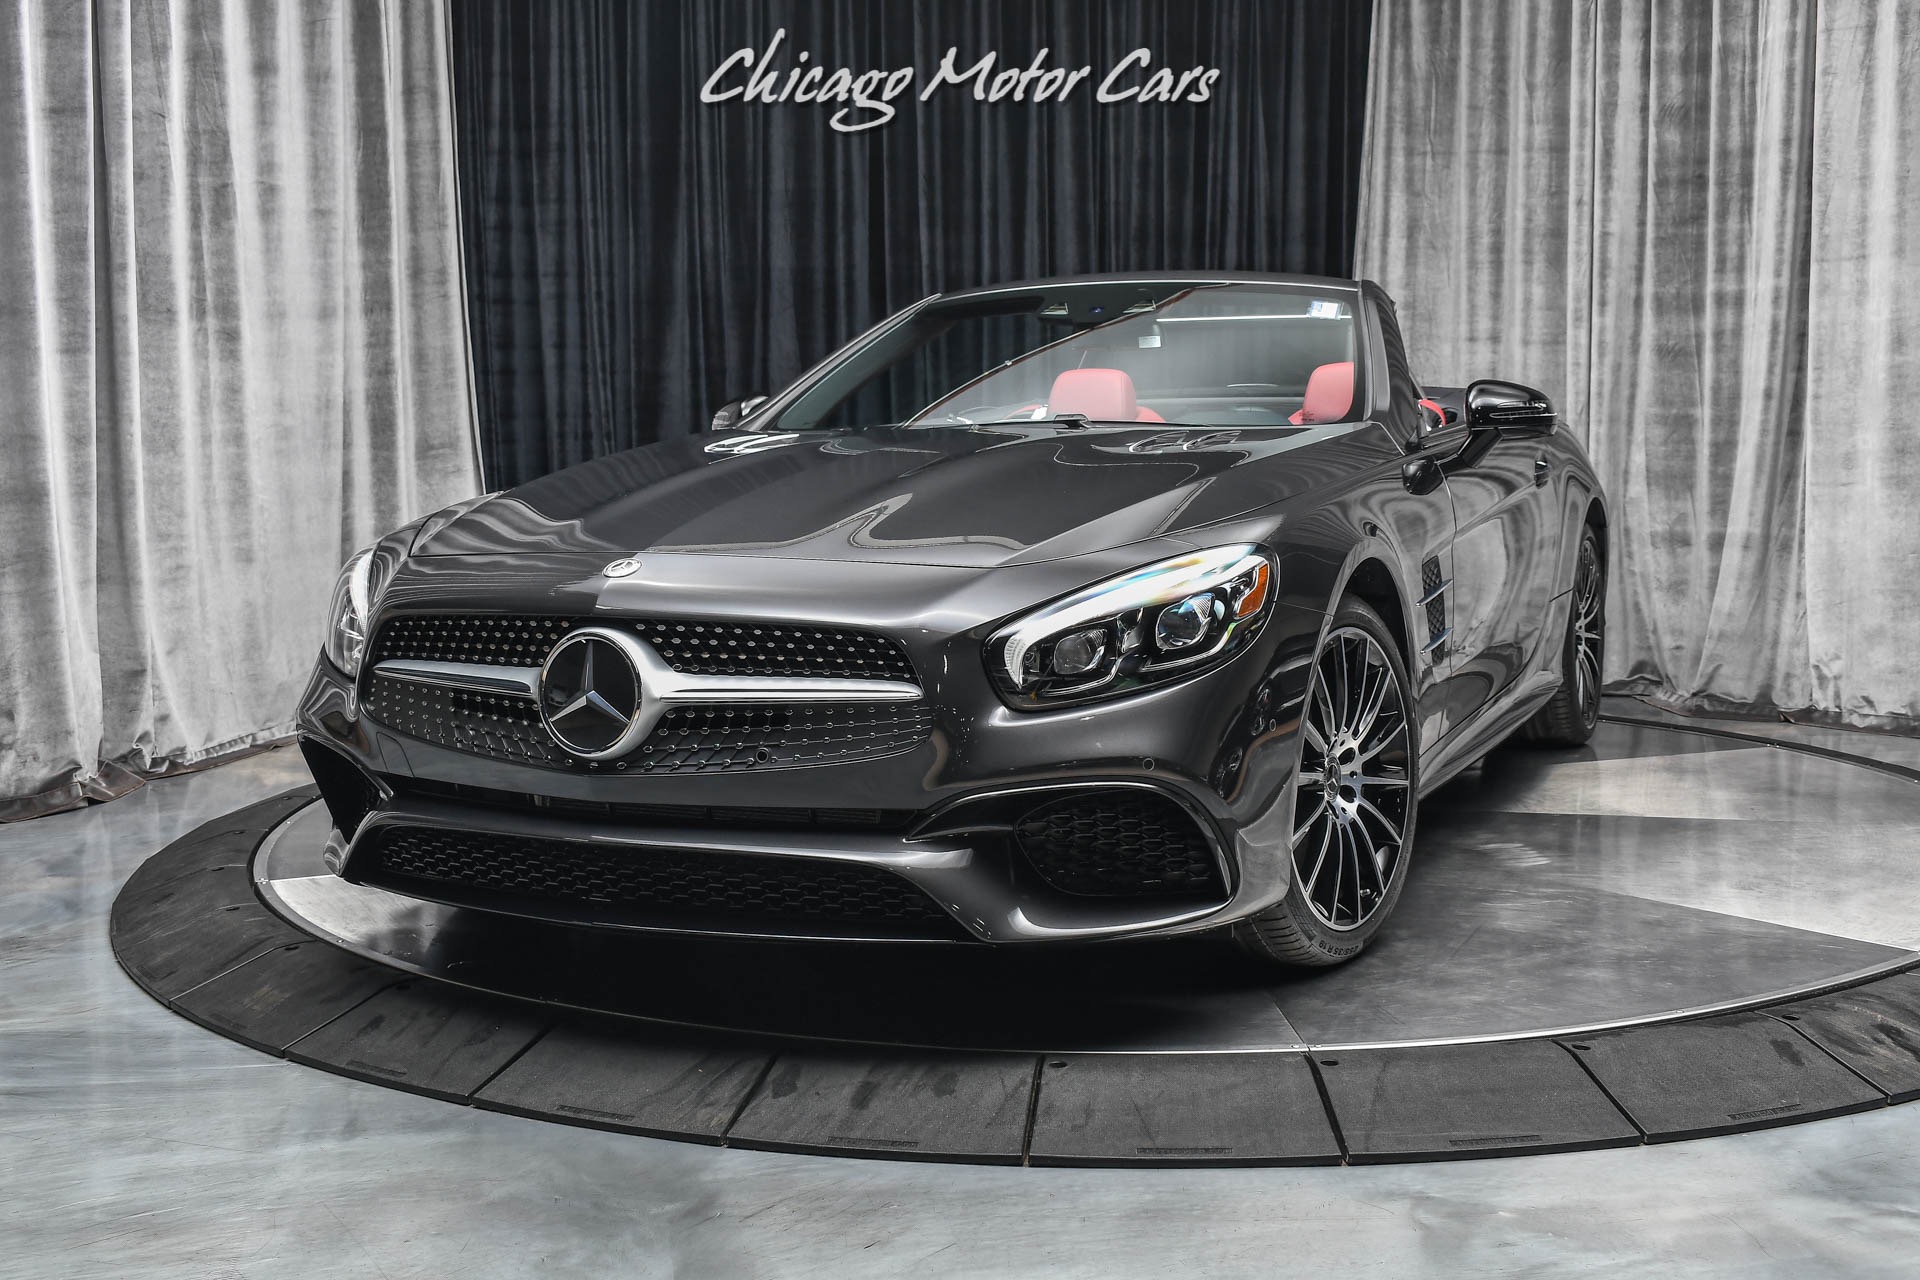 Used 2020 Mercedes-Benz SL450 Convertible Only 83 Miles Intelligent Drive  Package! LIKE BRAND NEW! For Sale ($81,800) | Chicago Motor Cars Stock  #17682